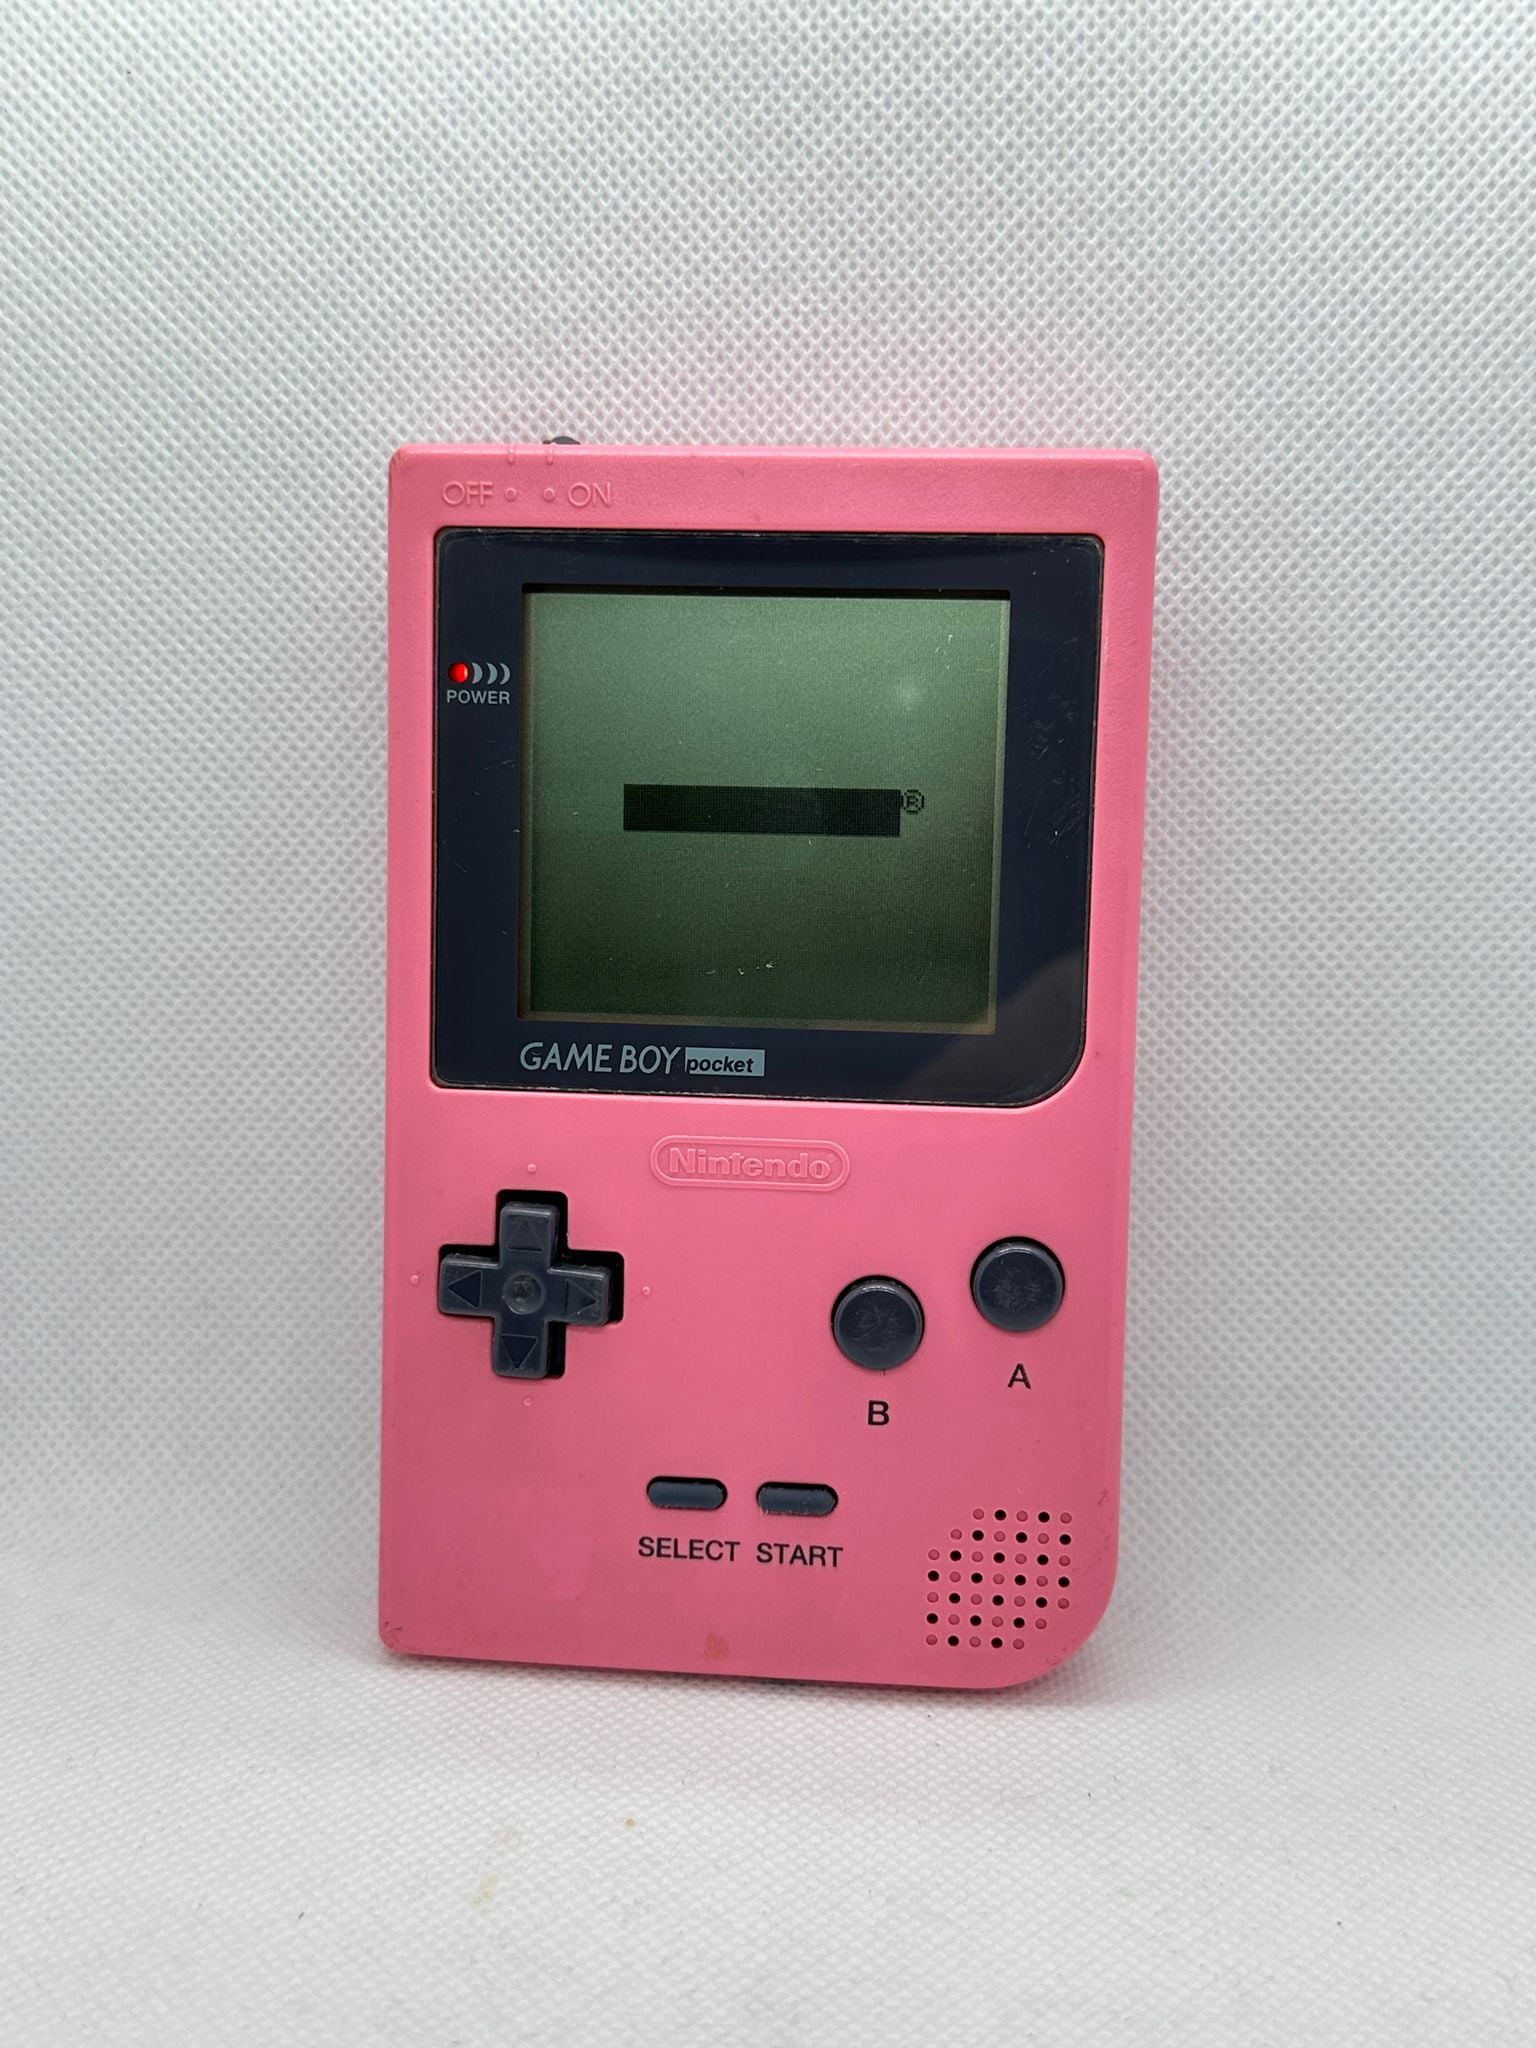 besværlige kind th Authentic Nintendo GameBoy Pocket Pink, Game Boy Console MGB-001 Tested  %100 OEM Works Great, Rare Collectable Pre-Owned - Walmart.com